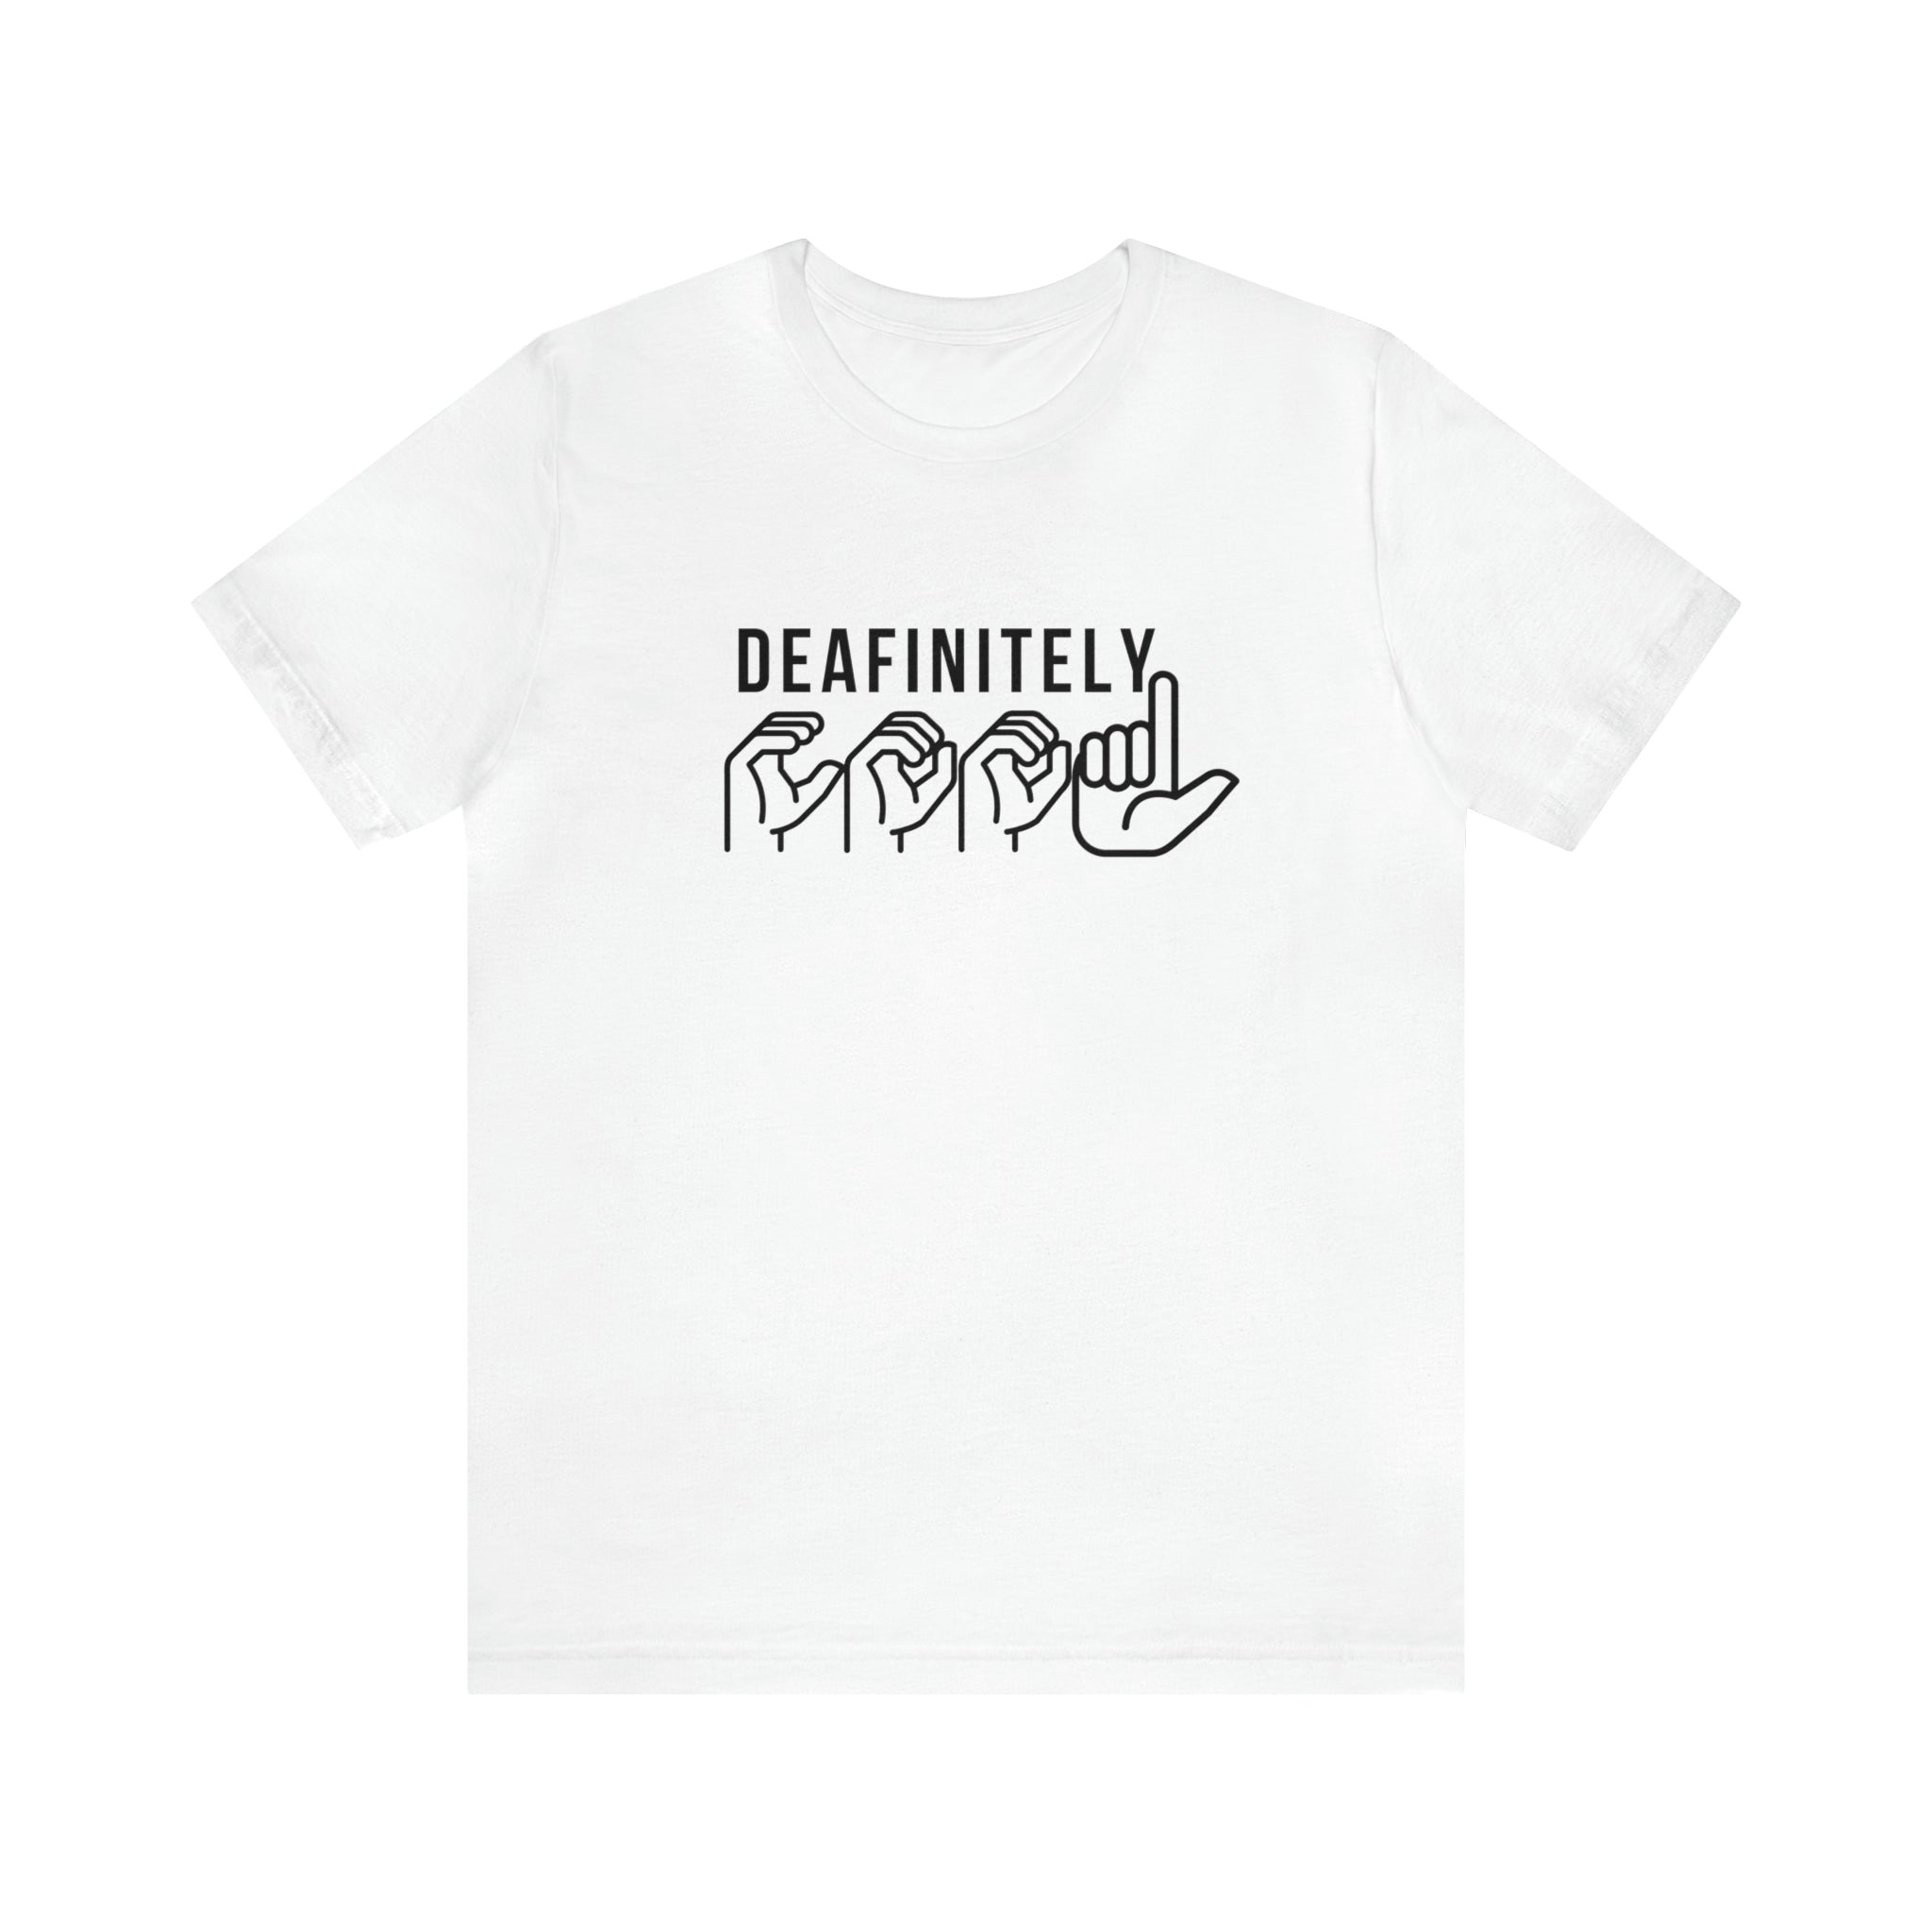 Deafinitely Cool Adult Unisex Jersey Short Sleeve Tee - The Kindness Cause